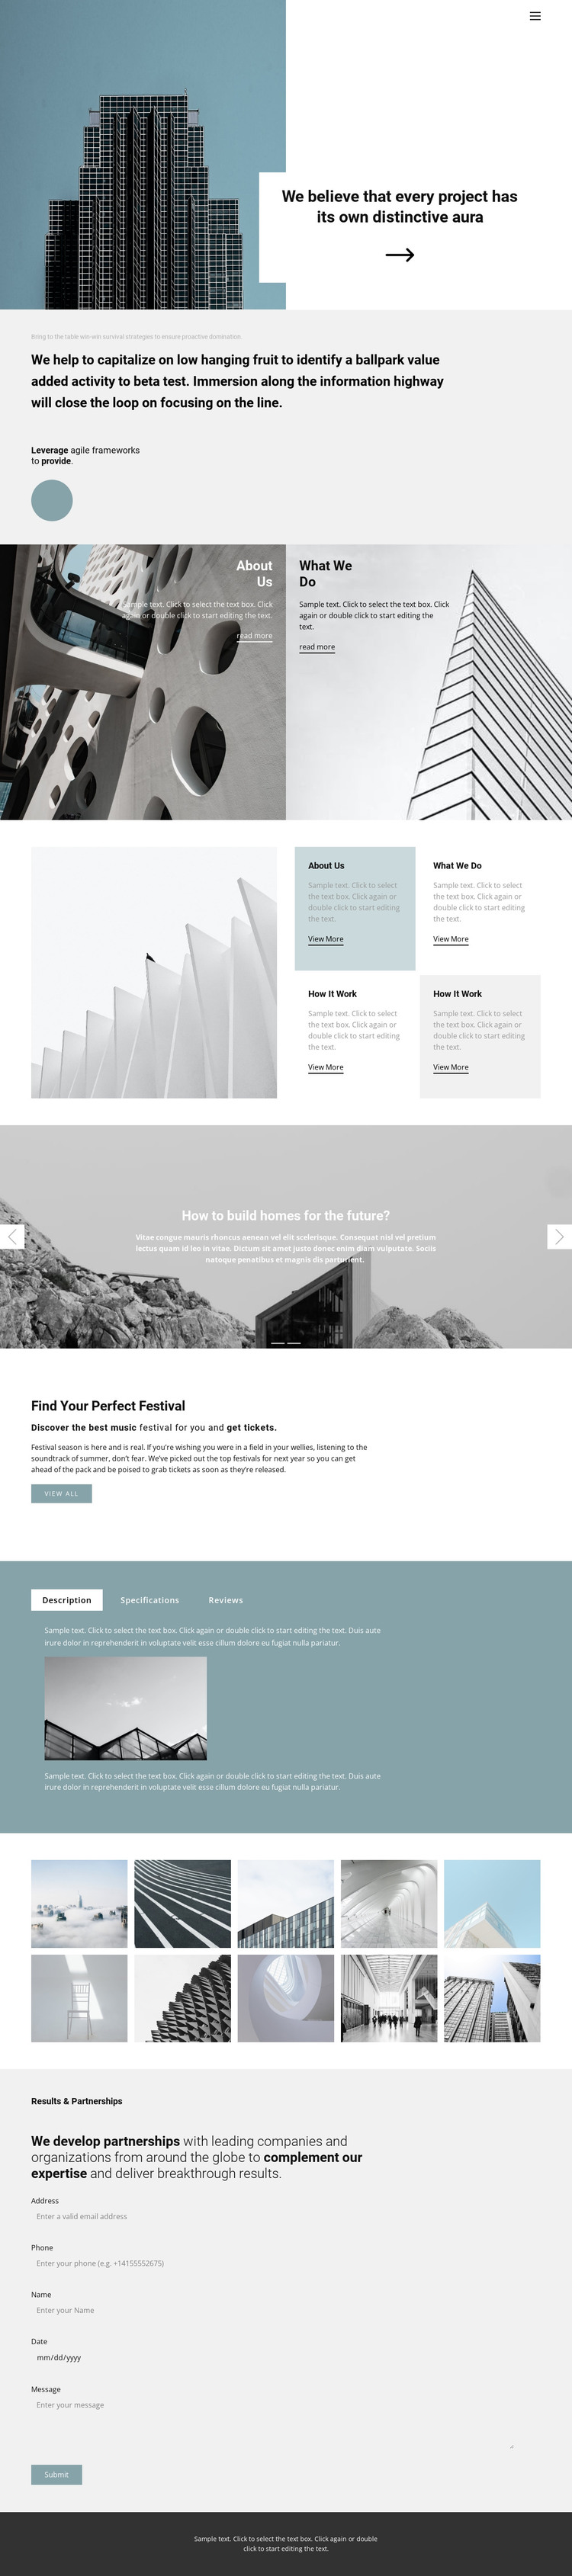 Choose an office for yourself HTML Template